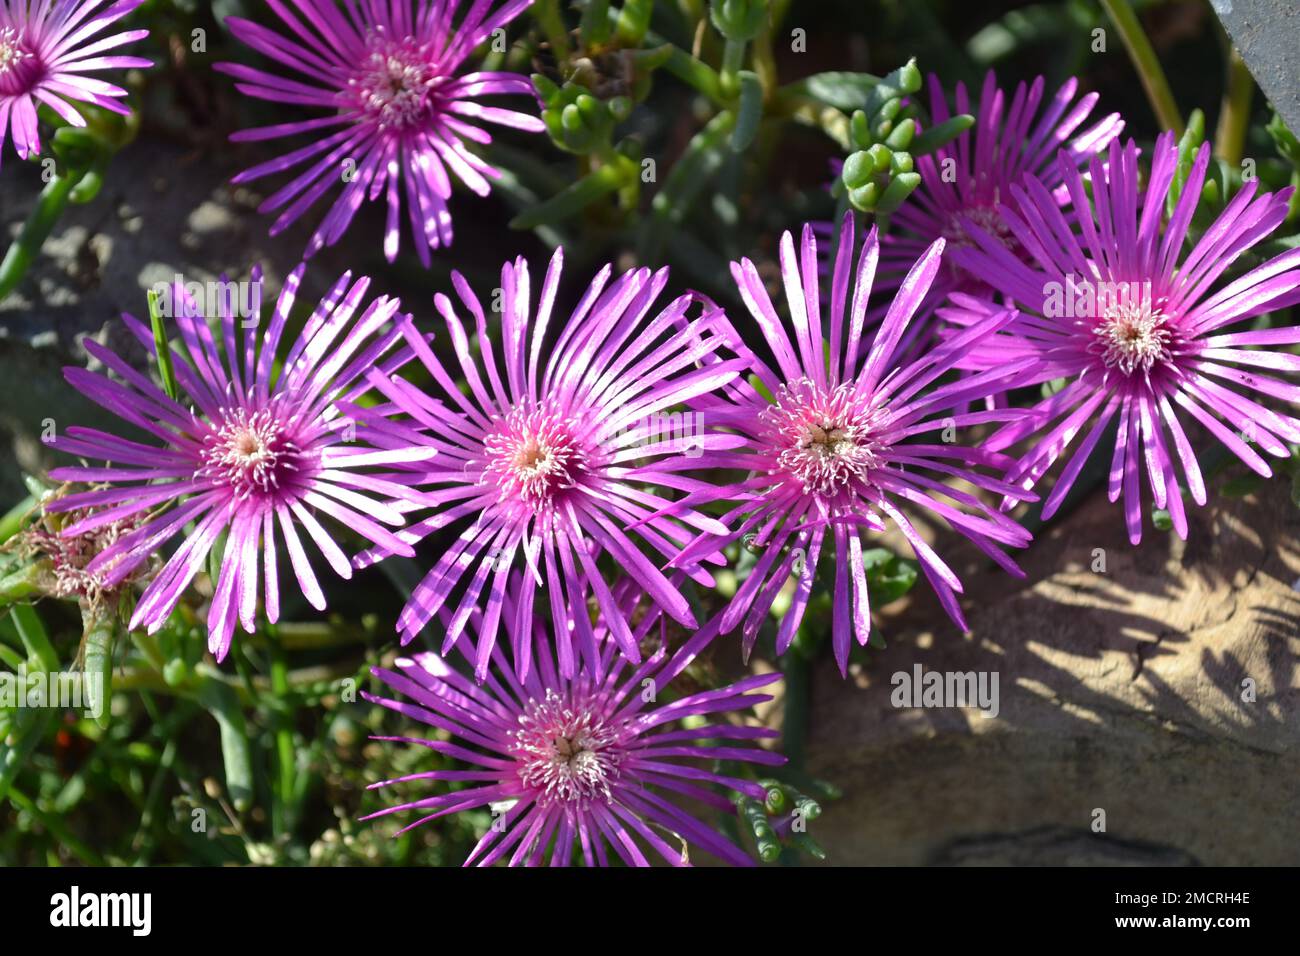 A group of beautiful purple flowers of delosperma cooperii cactus plant brightly lit by the sun. Ice plants. Purple flowers. Stock Photo